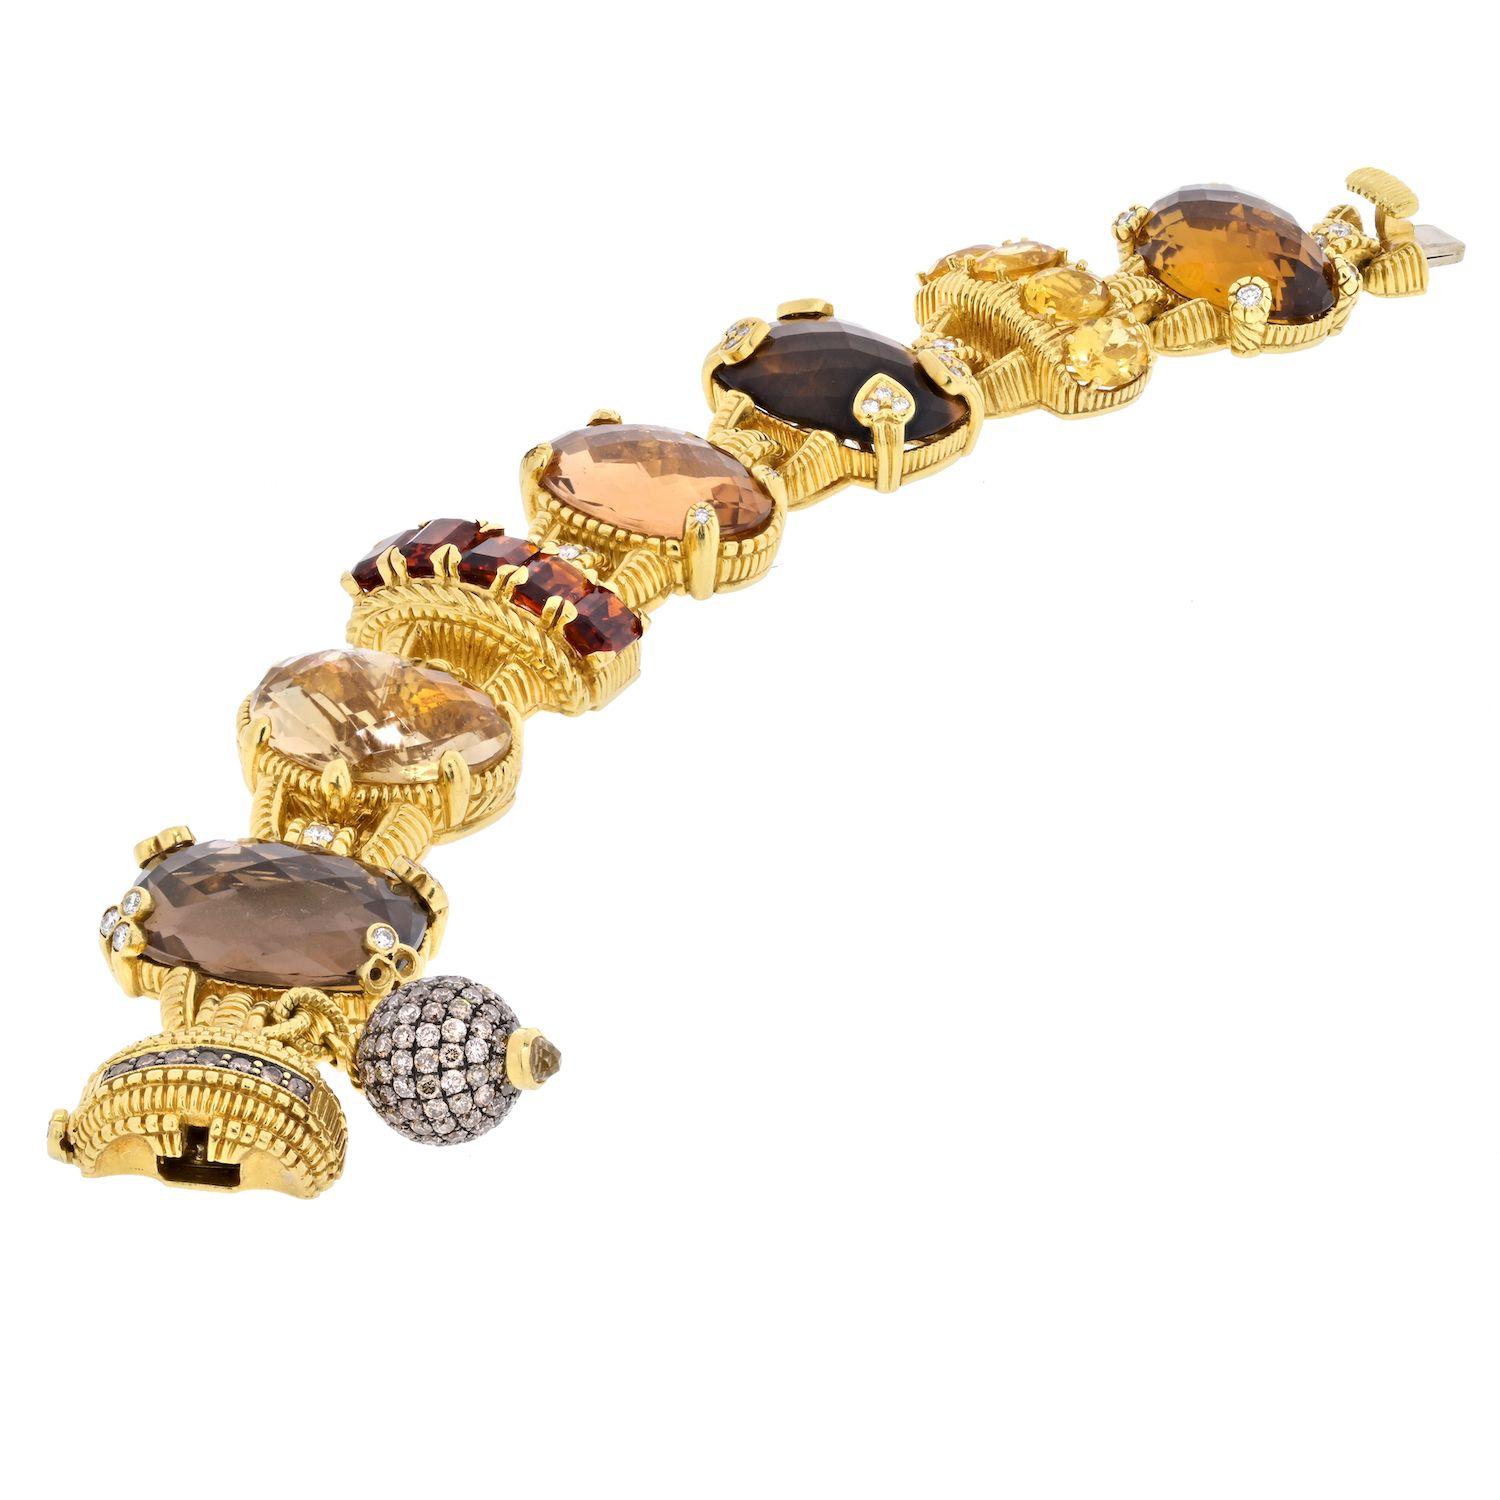 This is a stunning authentic bracelet by Judith Ripka, it is crafted from 18k yellow gold featuring 5 oval shape large gemstones with two curved frame links and 1 heart shape, all set with smoky quartz, citrine and peridot. Between some of the links